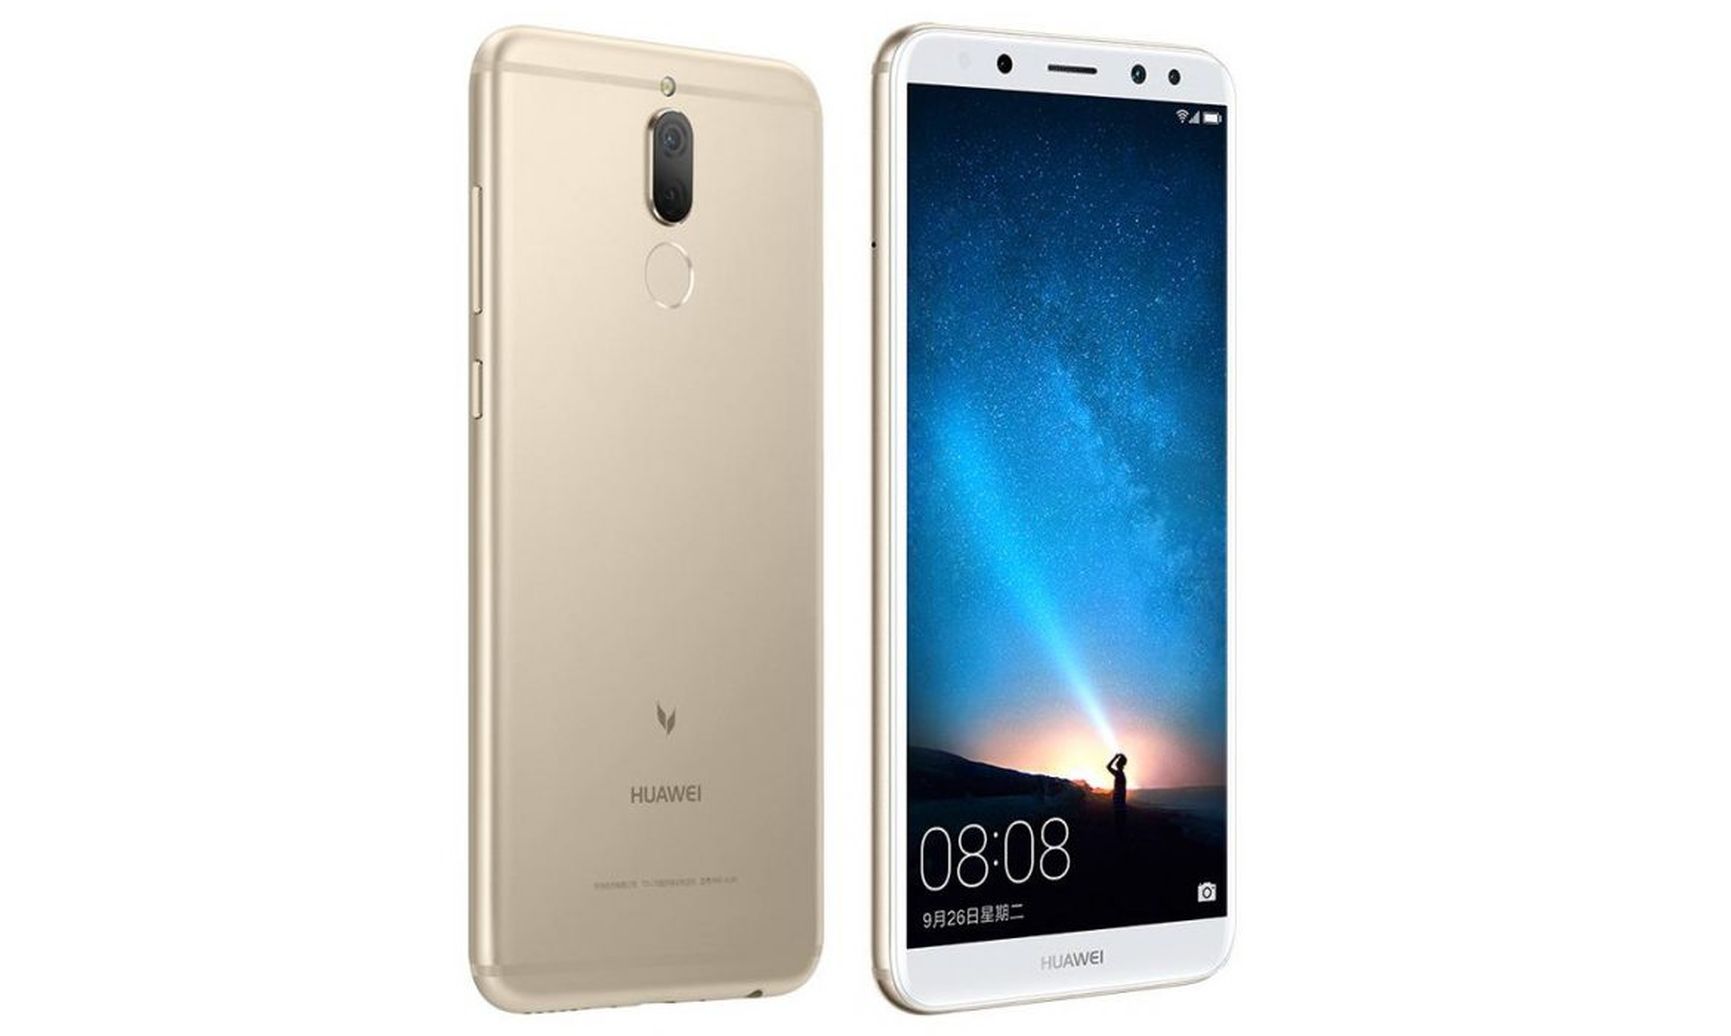 Brutal Kangaroo Samuel Huawei Mate 10 Lite specs, price, release date, and features